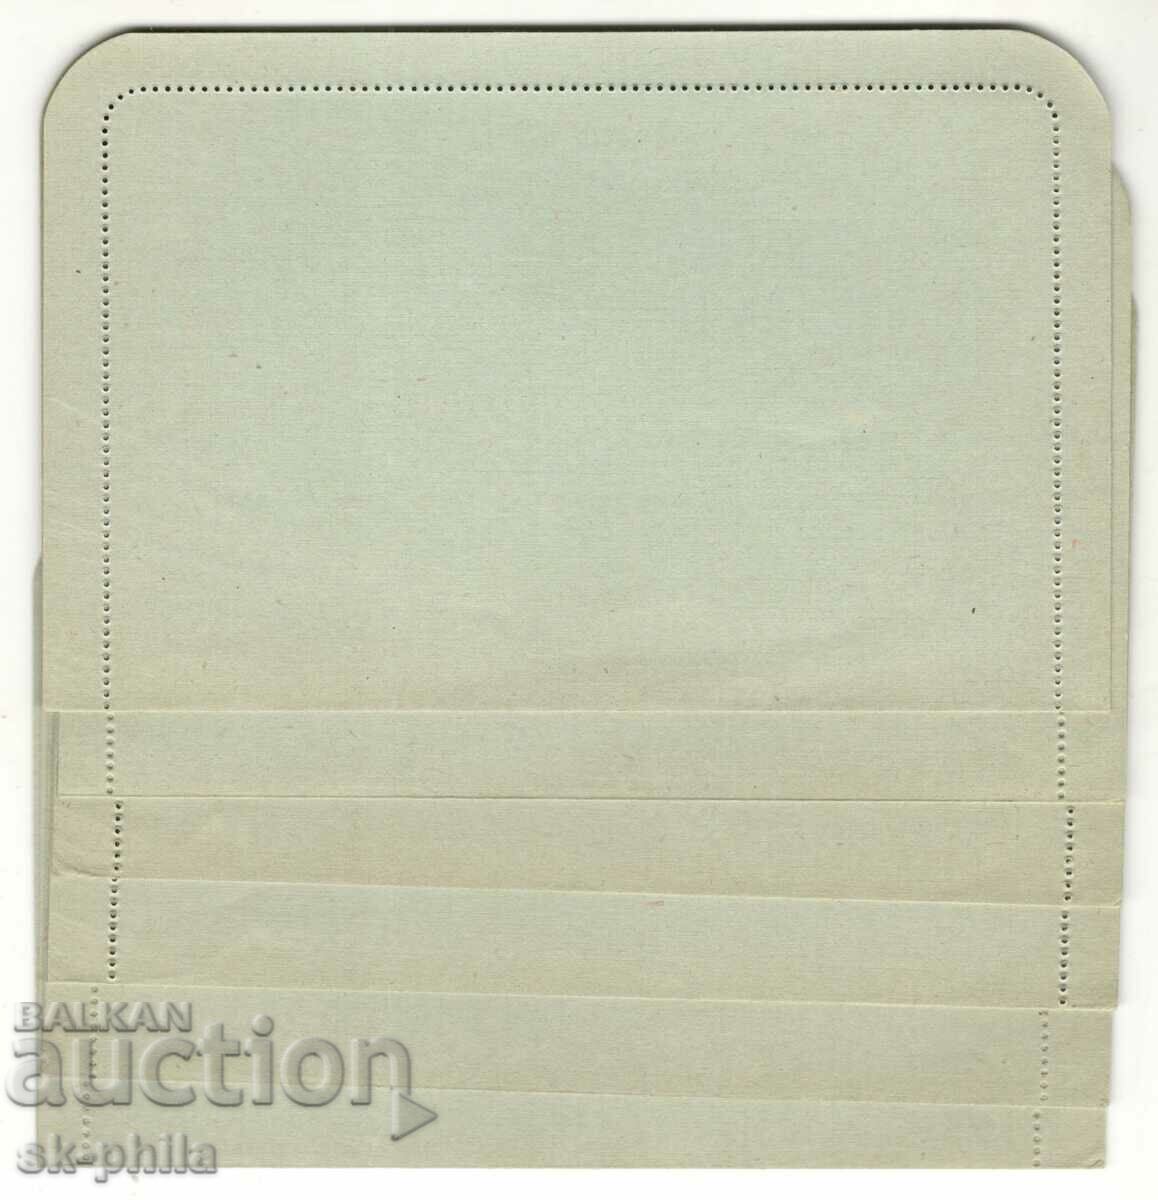 Old envelopes - self-adhesive - 6 pieces